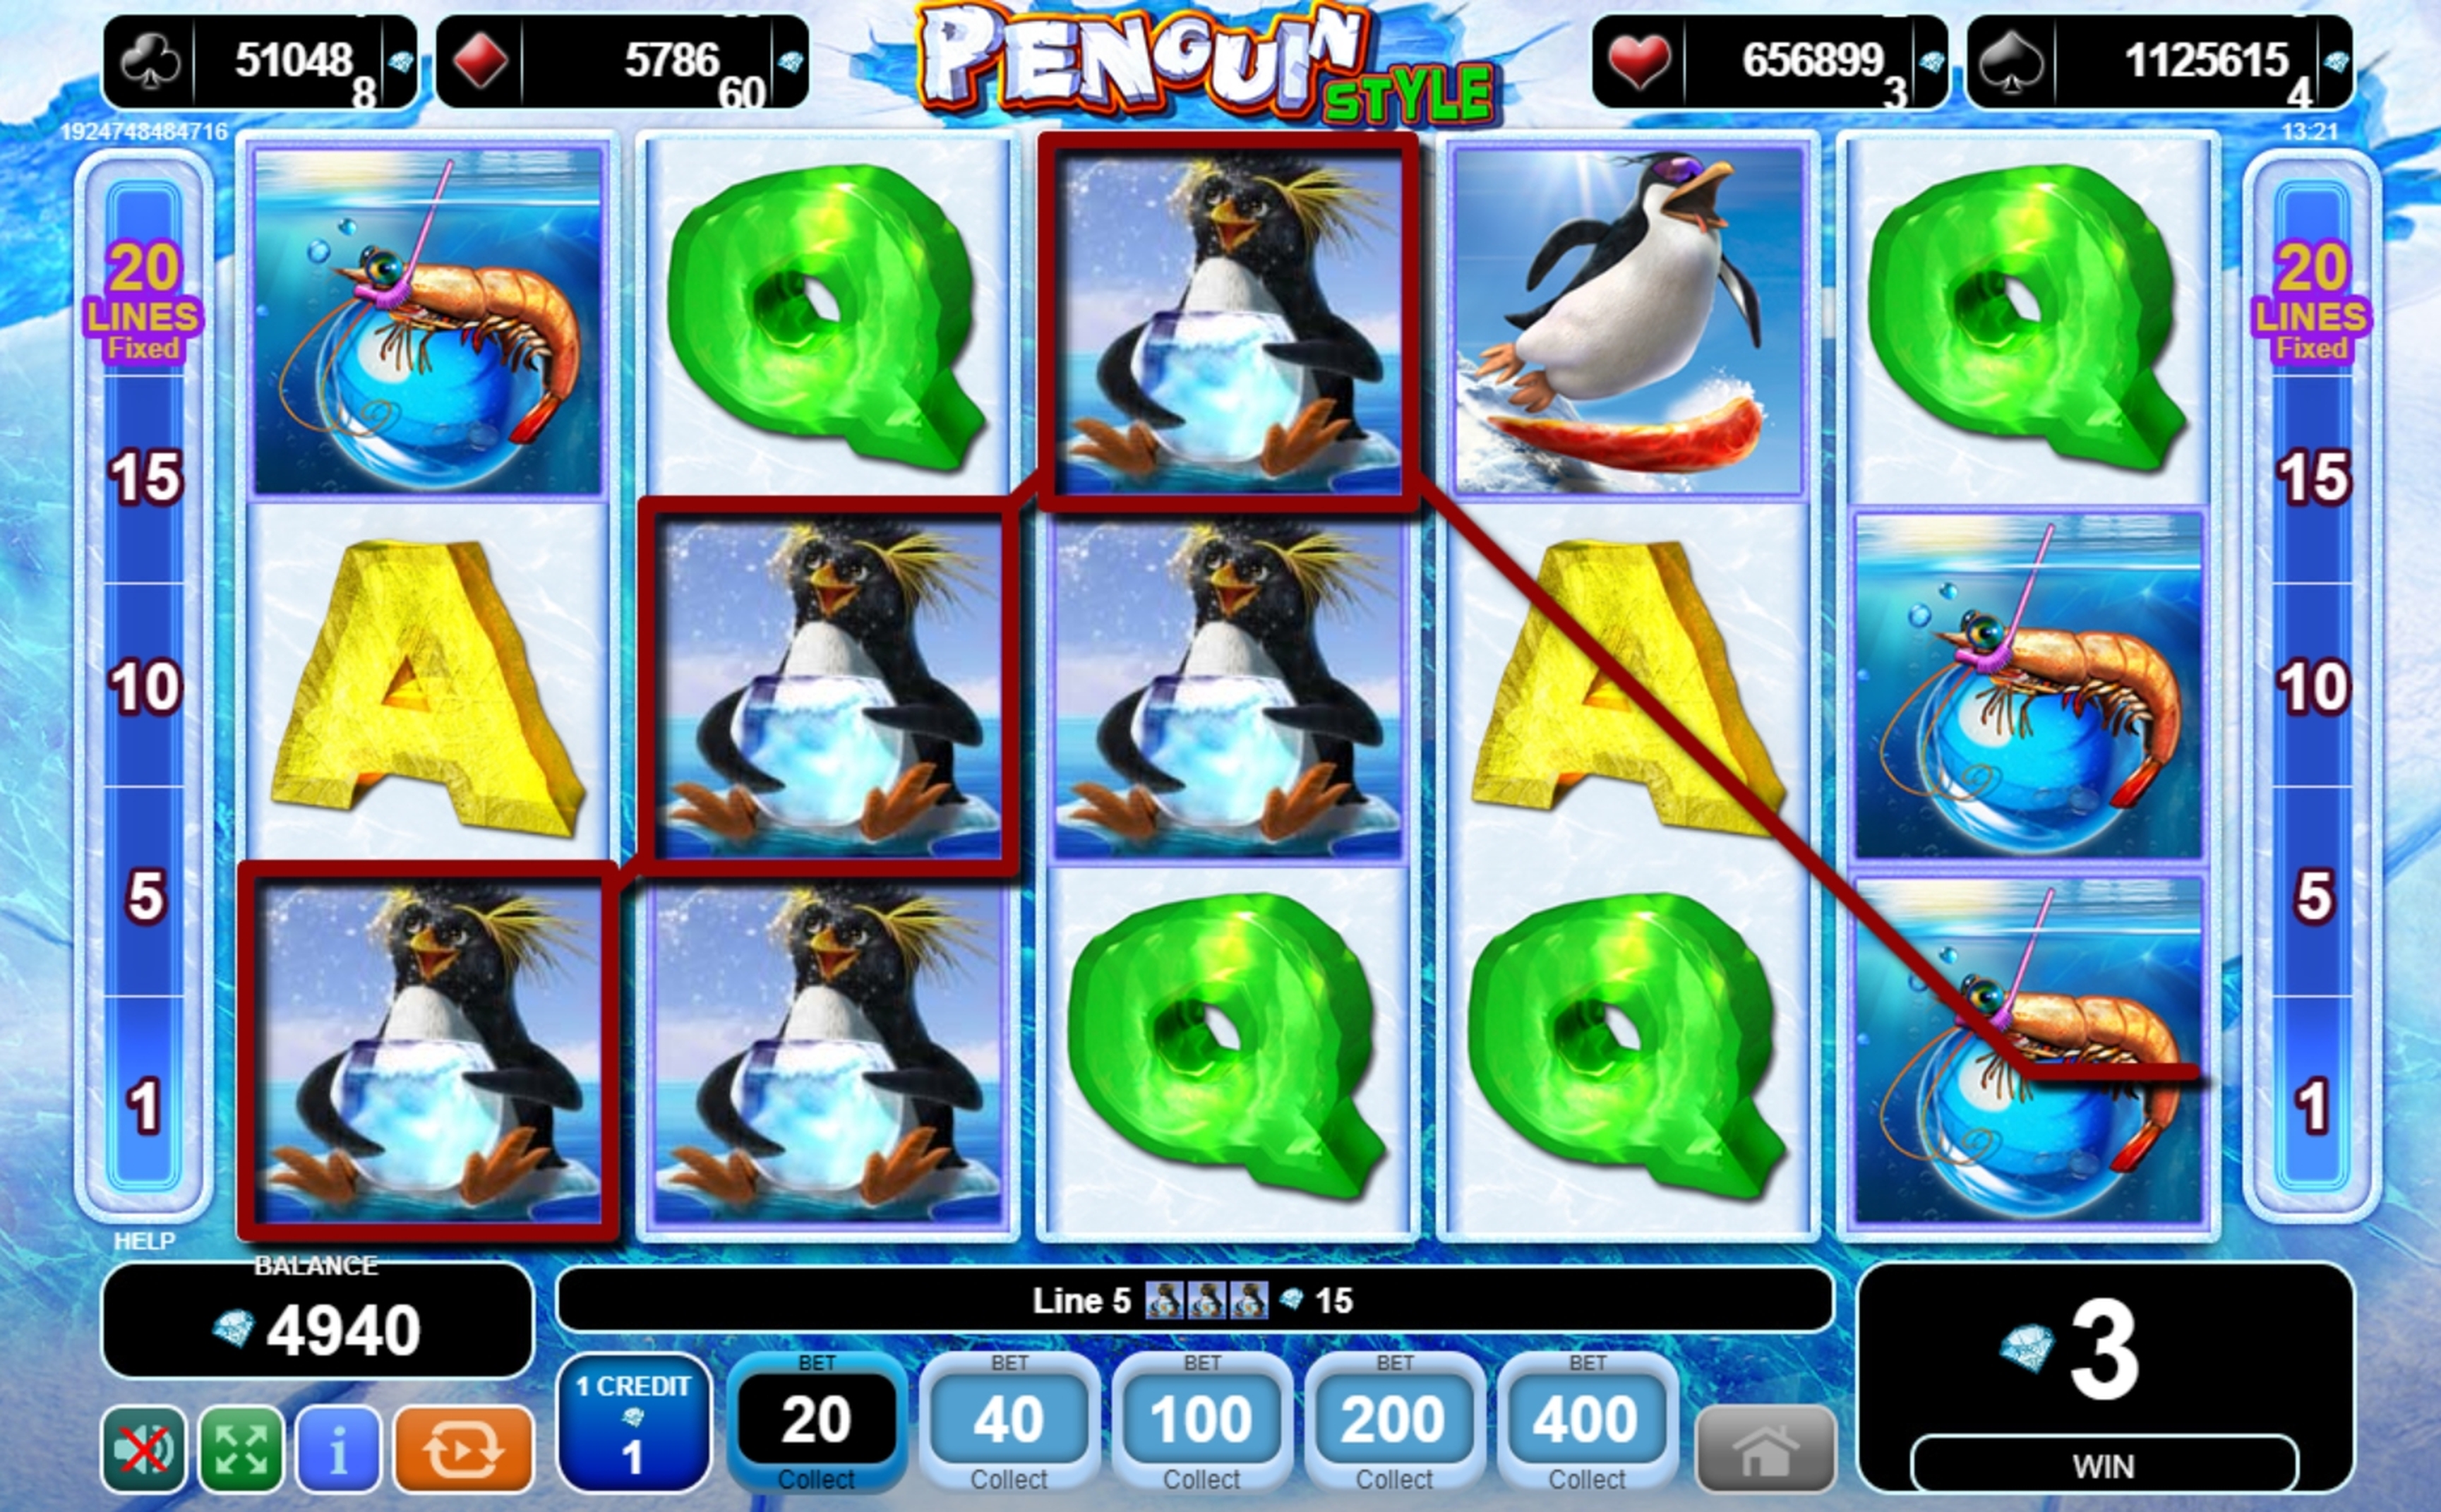 Win Money in Penguin Style Free Slot Game by EGT